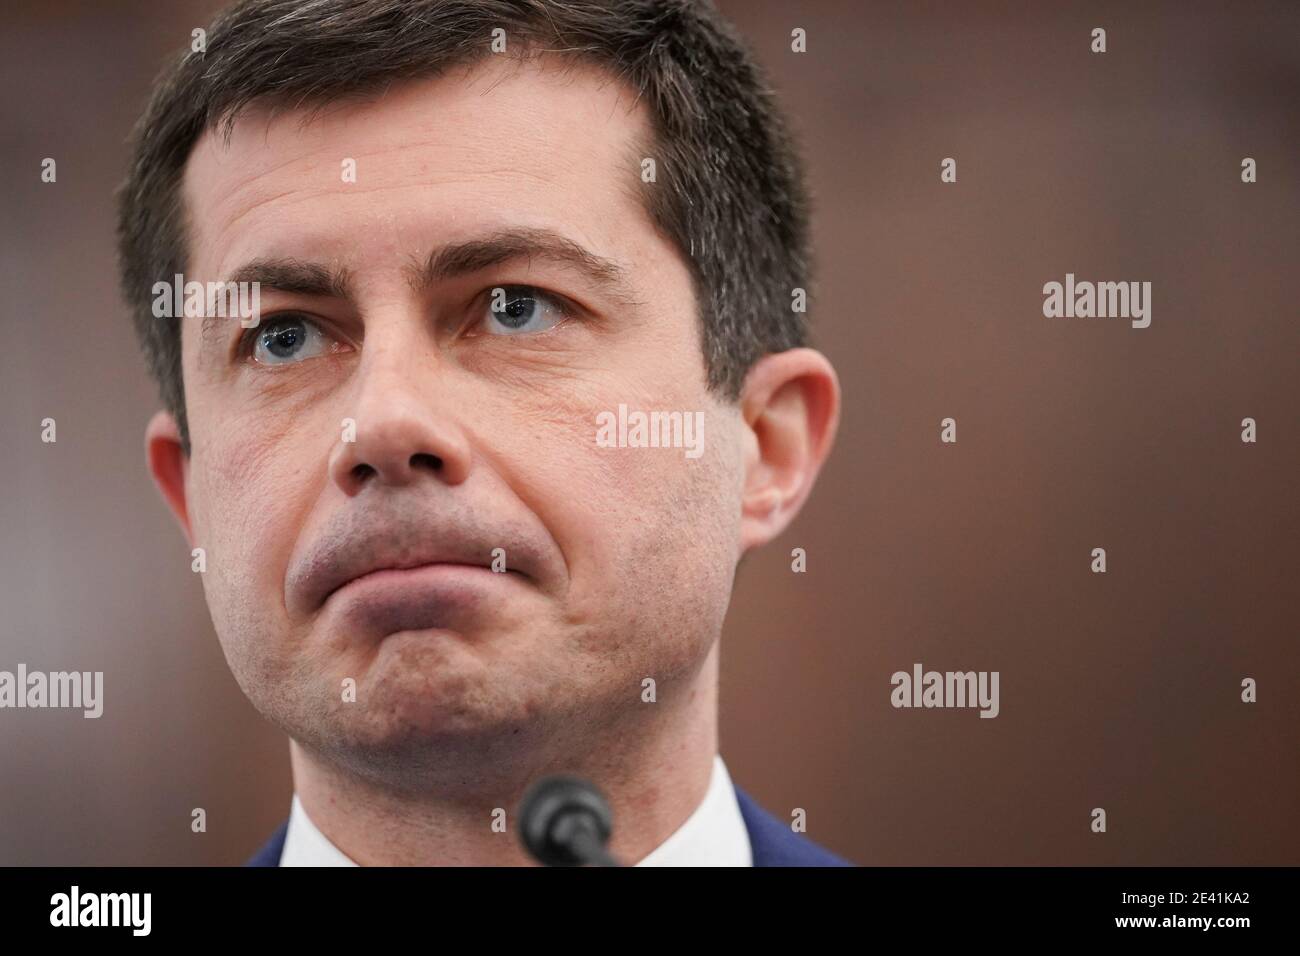 Washington, DC, USA. 21st Jan, 2021. Pete Buttigieg, U.S. secretary of transportation nominee for U.S. President Joe Biden, pauses during a Senate Commerce, Science and Transportation Committee confirmation hearing in Washington, DC, U.S., on Thursday, Jan. 21, 2021. Buttigieg, is pledging to carry out the administration's ambitious agenda to rebuild the nation's infrastructure, calling it a 'generational opportunity' to create new jobs, fight economic inequality and stem climate change. Credit: Stefani Reynolds/Pool via CNP | usage worldwide Credit: dpa/Alamy Live News Stock Photo